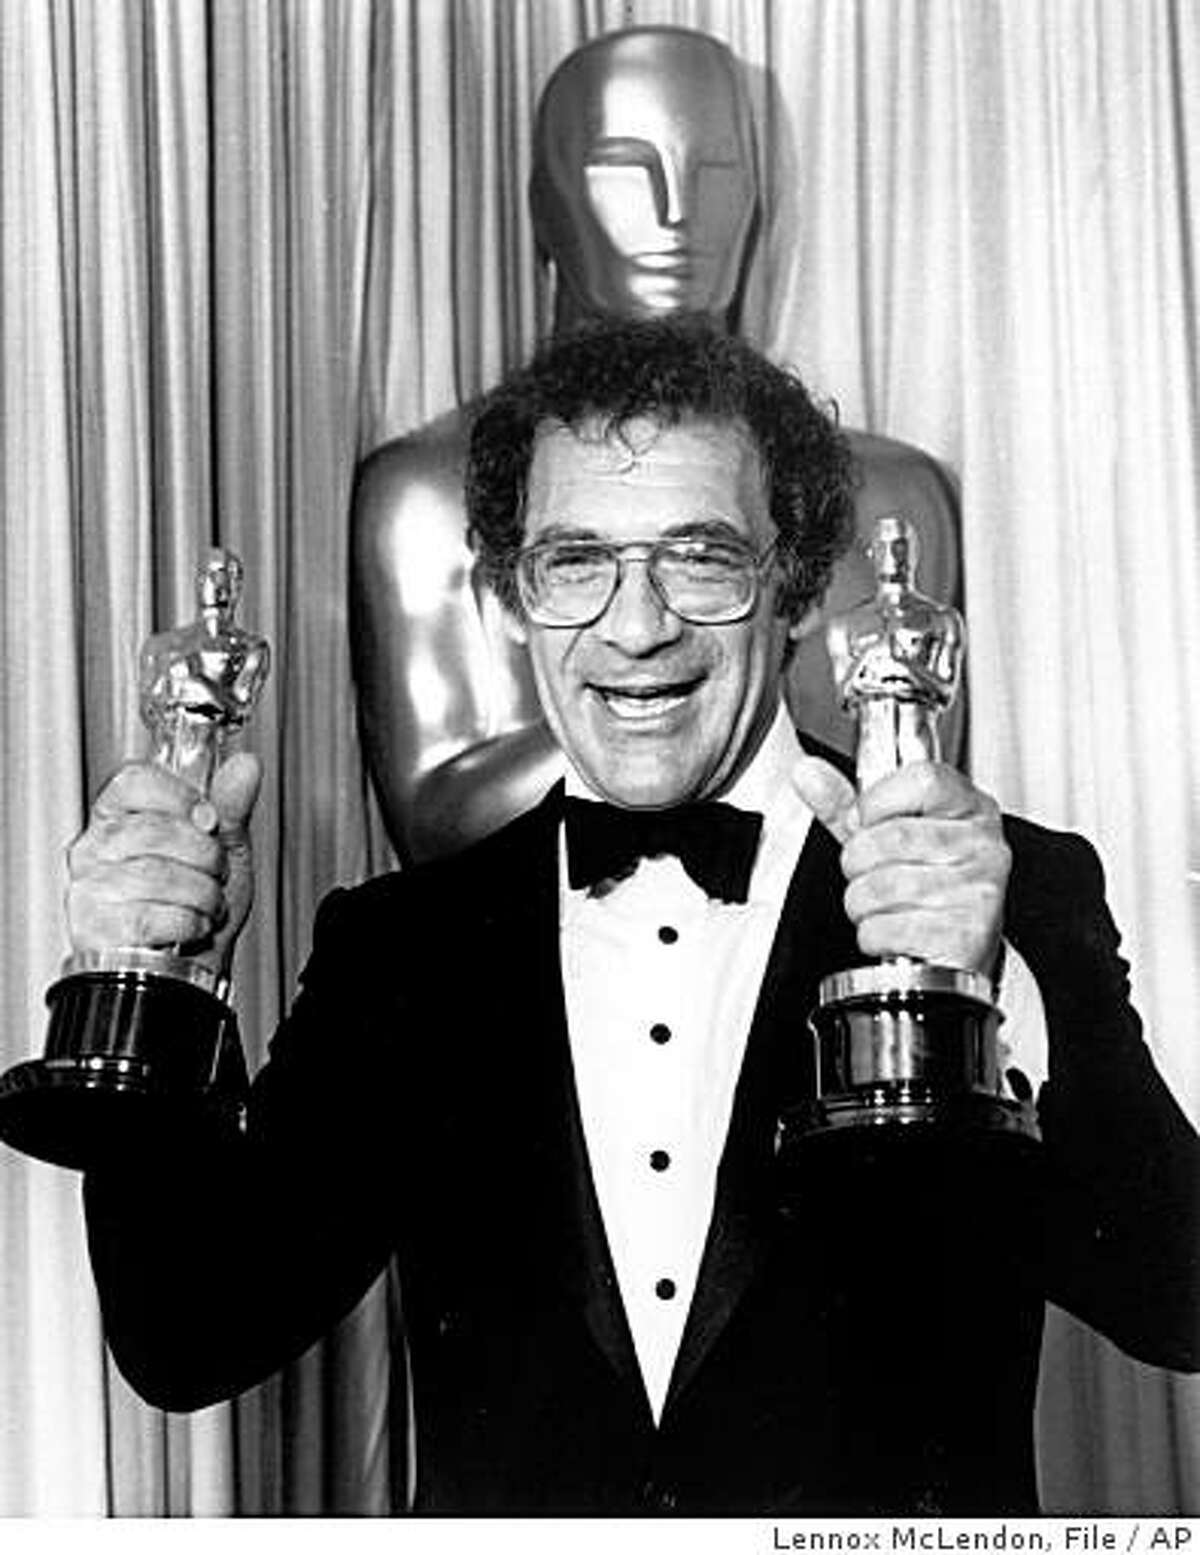 In this March 25, 1986 file photo, Sydney Pollack holds his two Oscars at the Academy Awards in Los Angeles. Pollack won best director for "Out of Africa," which he also produced and won best picture of the year.